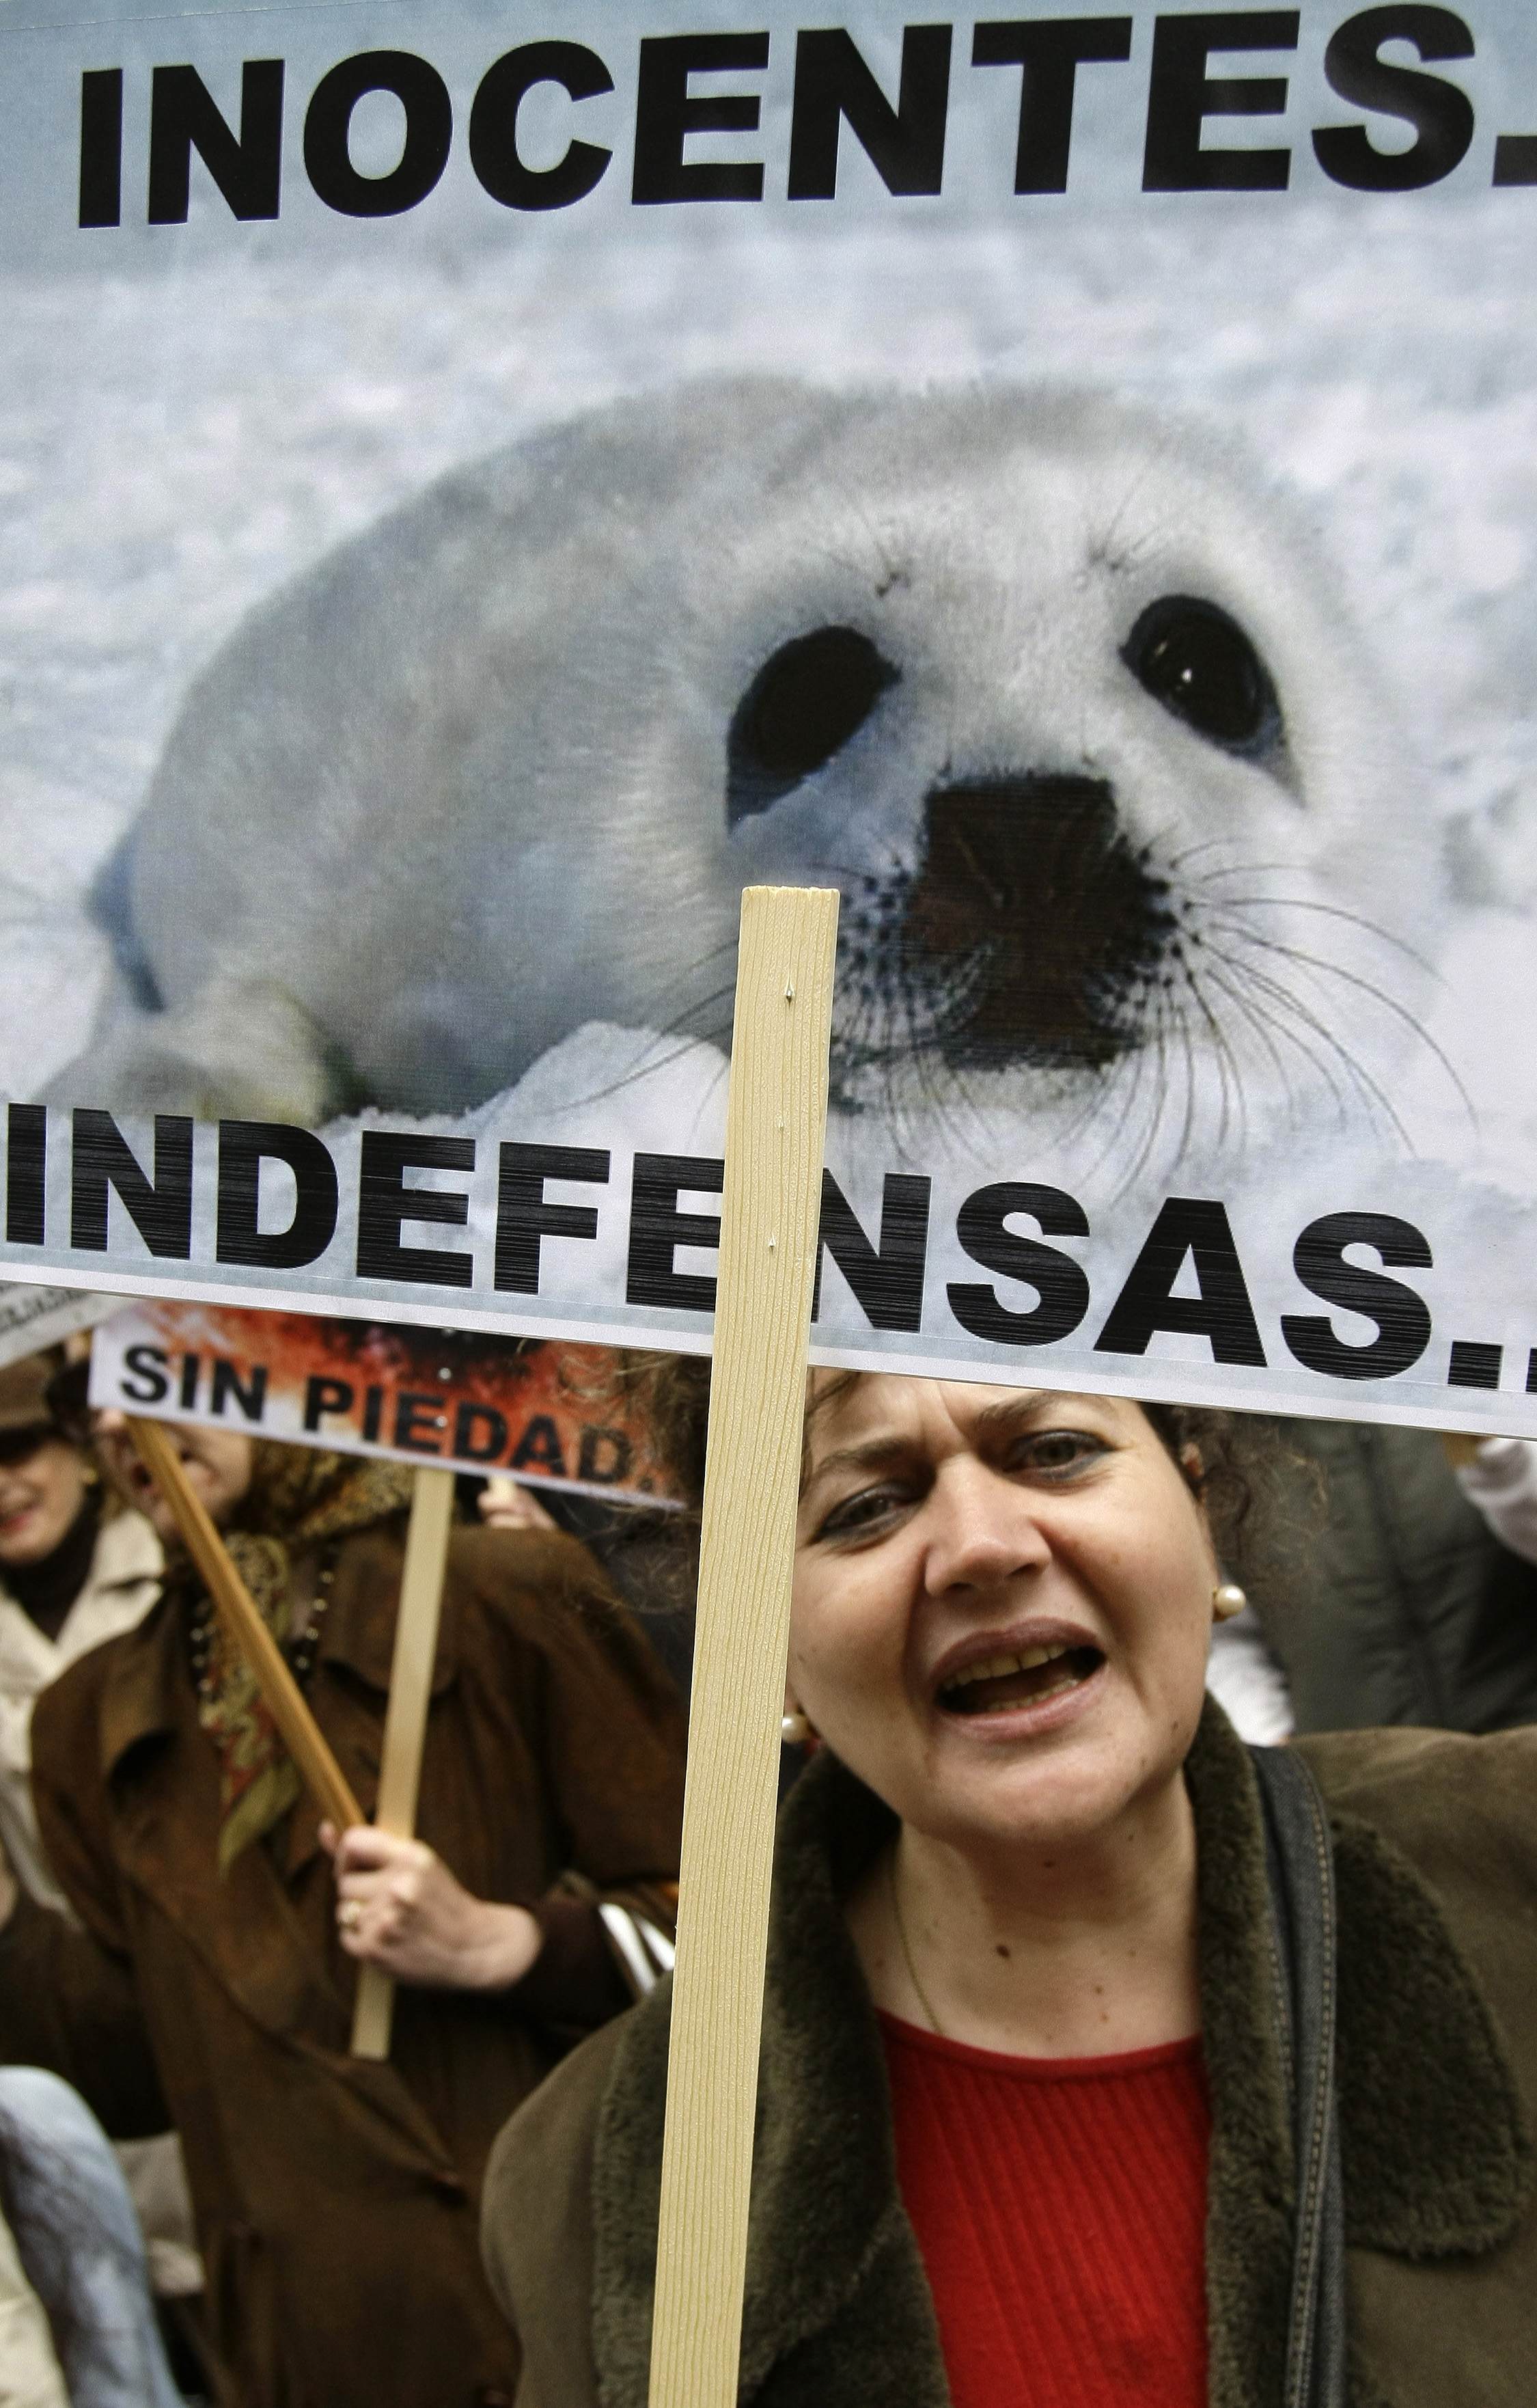 Protests against Canada's seal hunt